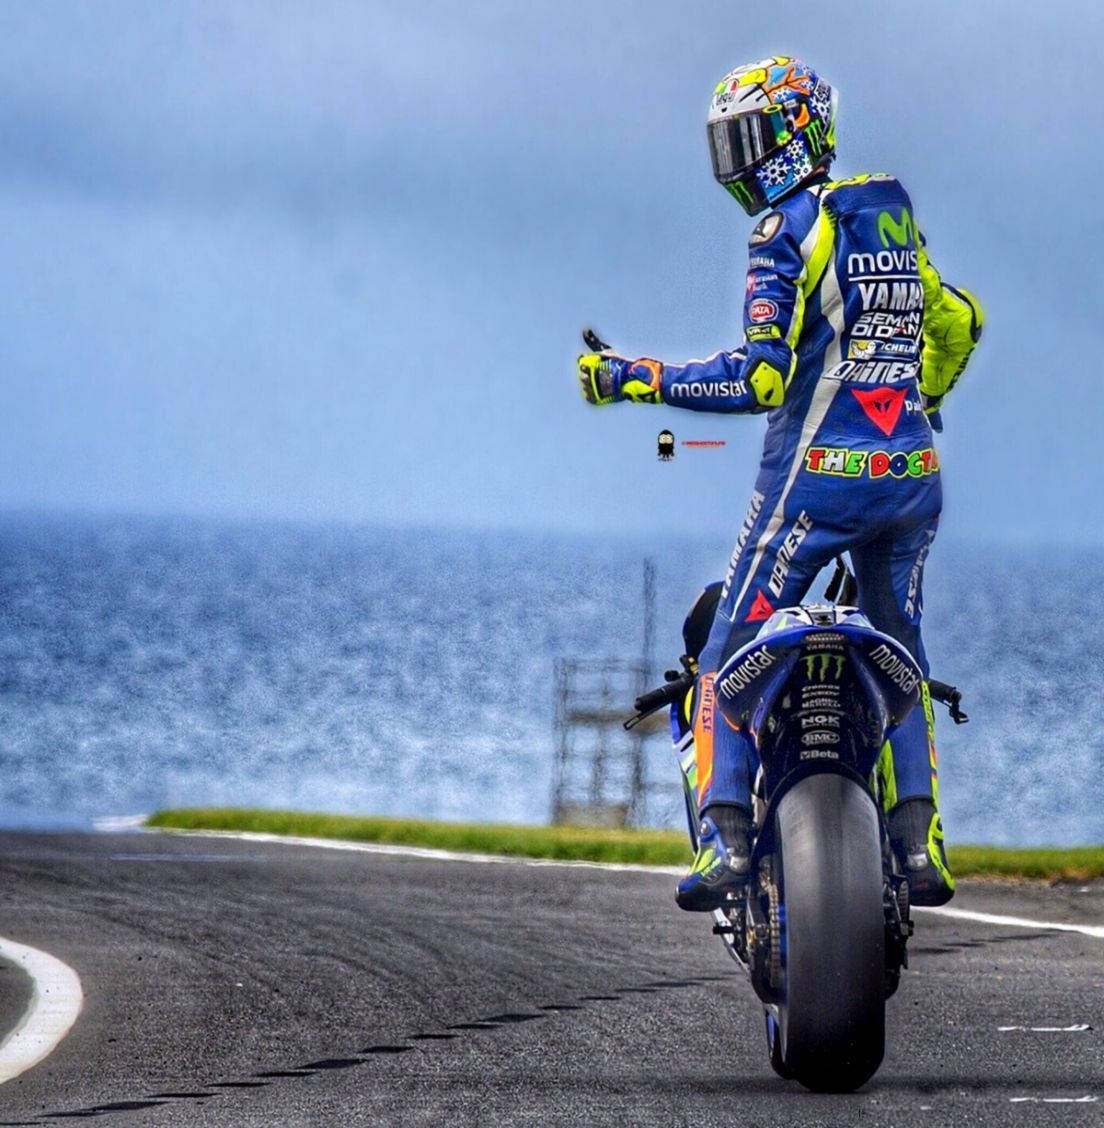 Valentino Rossi, The Legendary Motorcycle Racing Champion Background